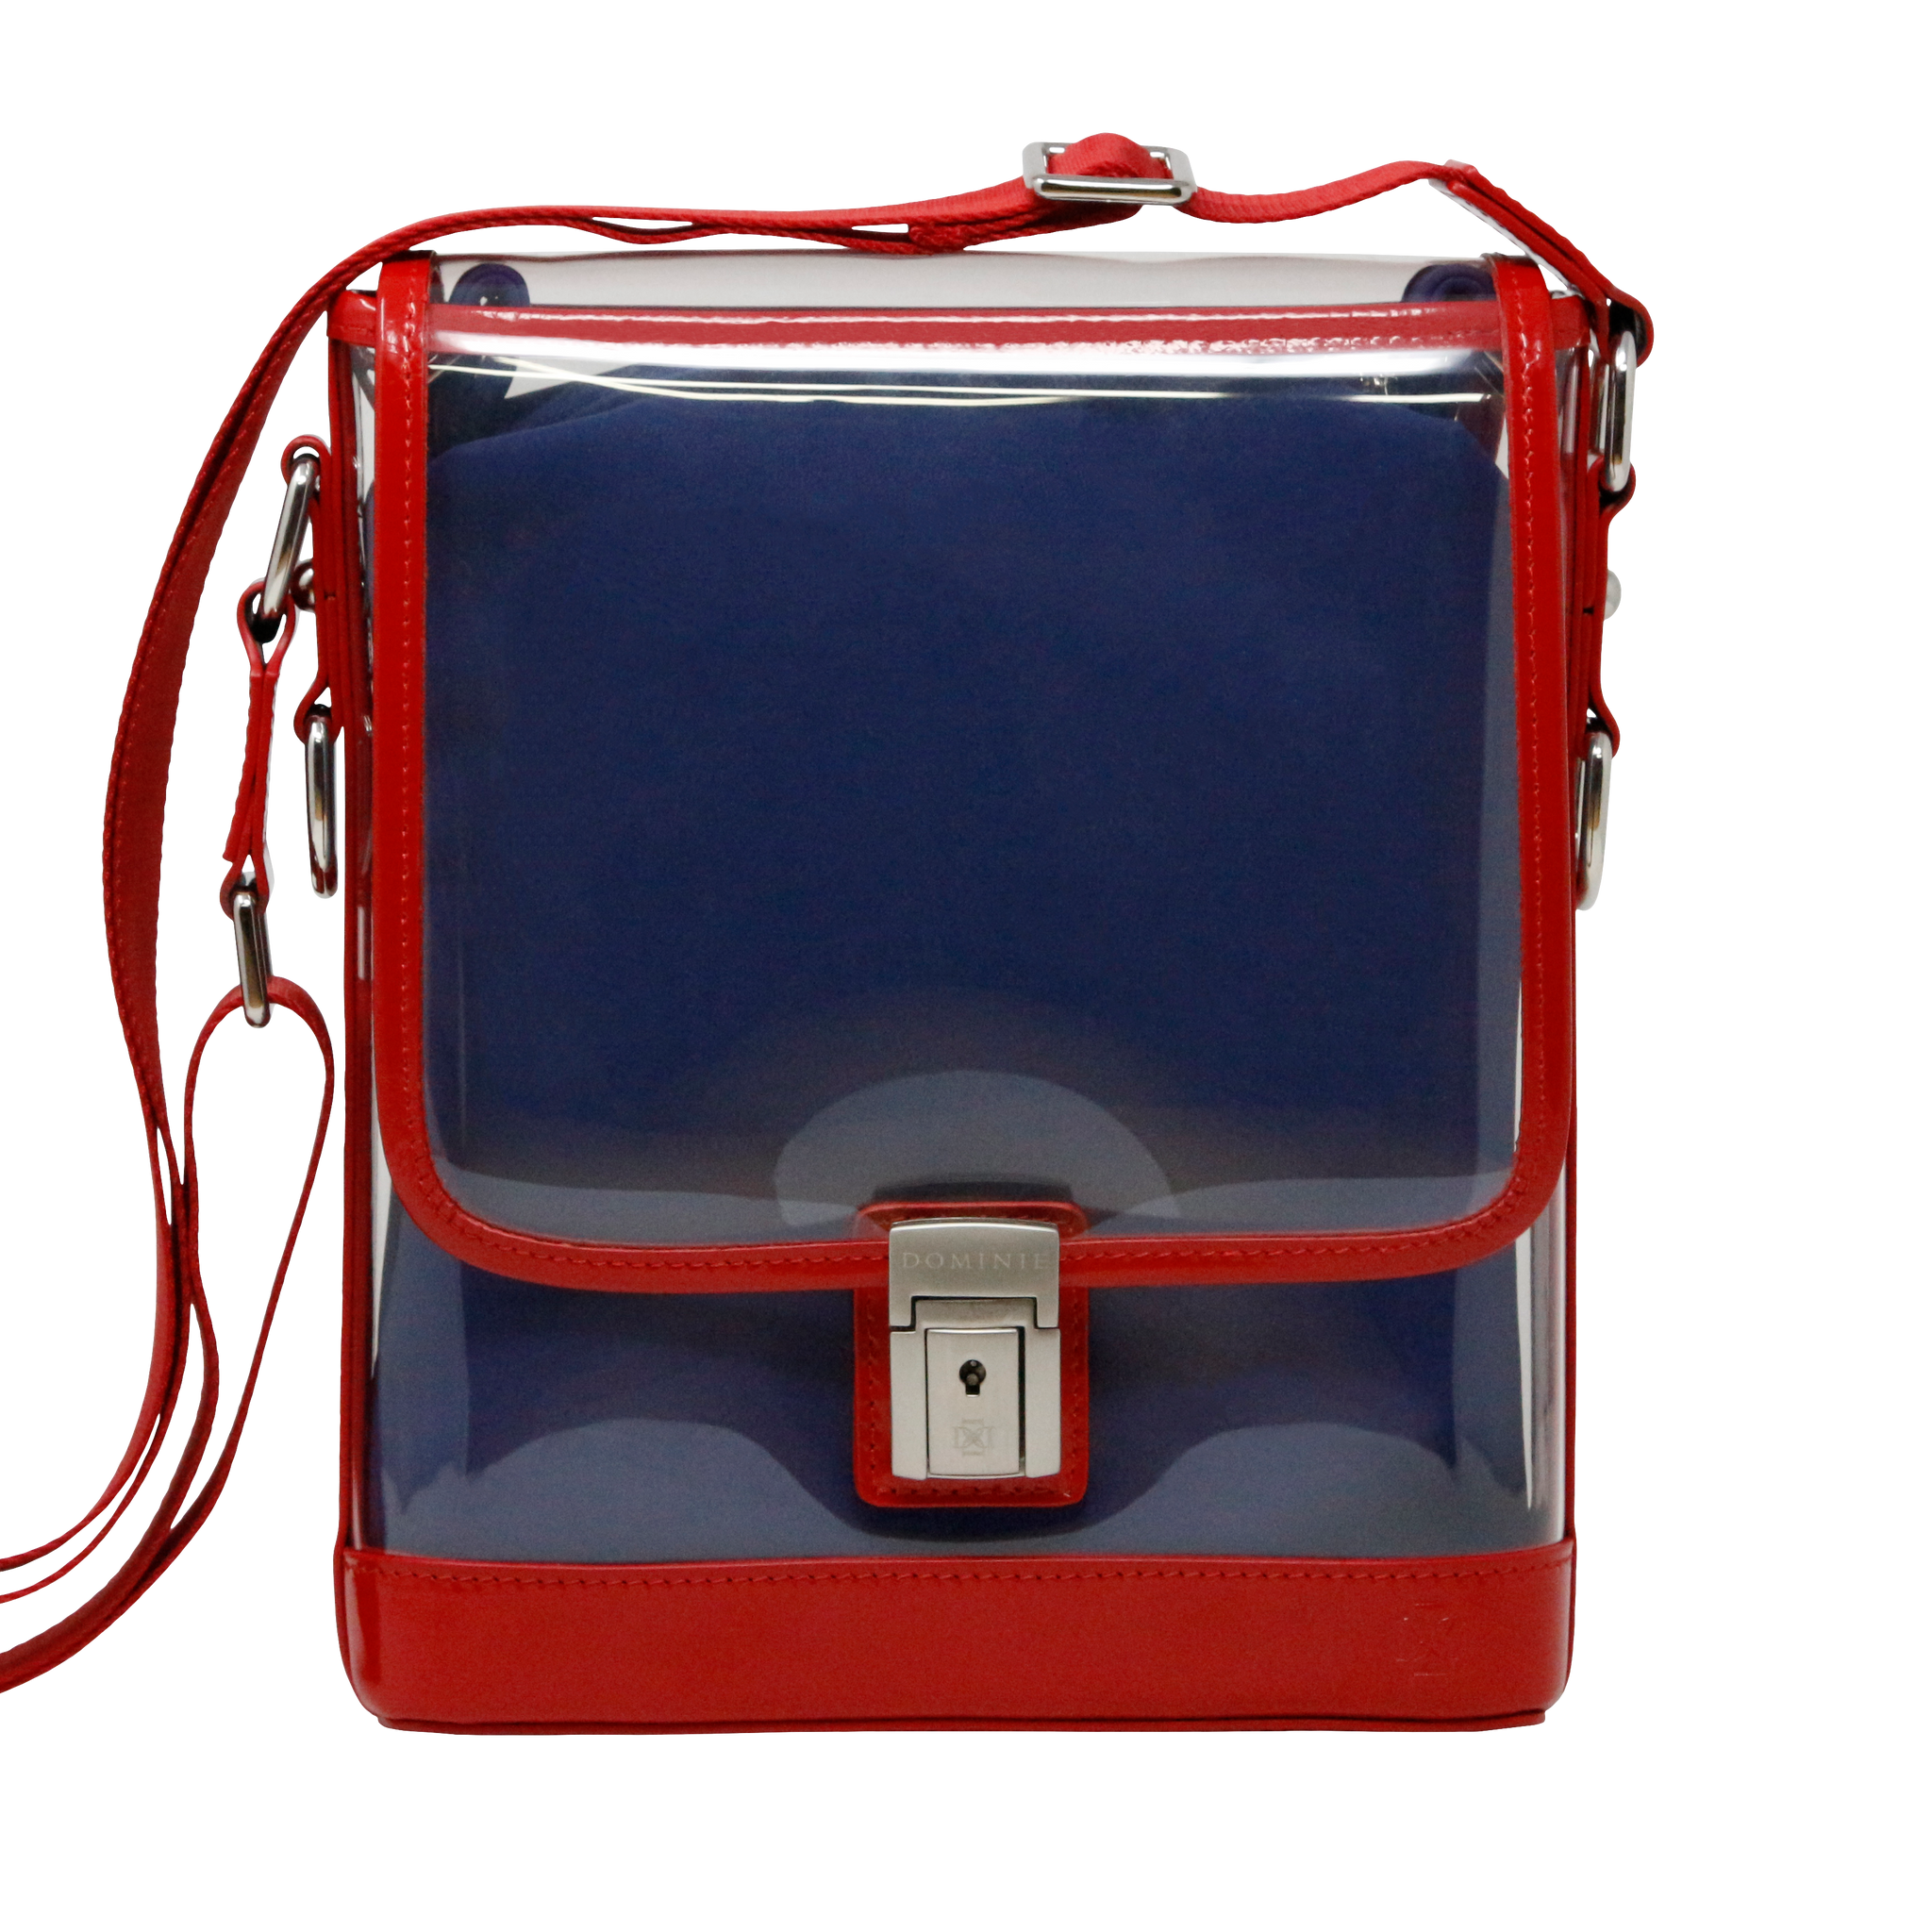 Messenger Red Holographic Patent Leather Bundle